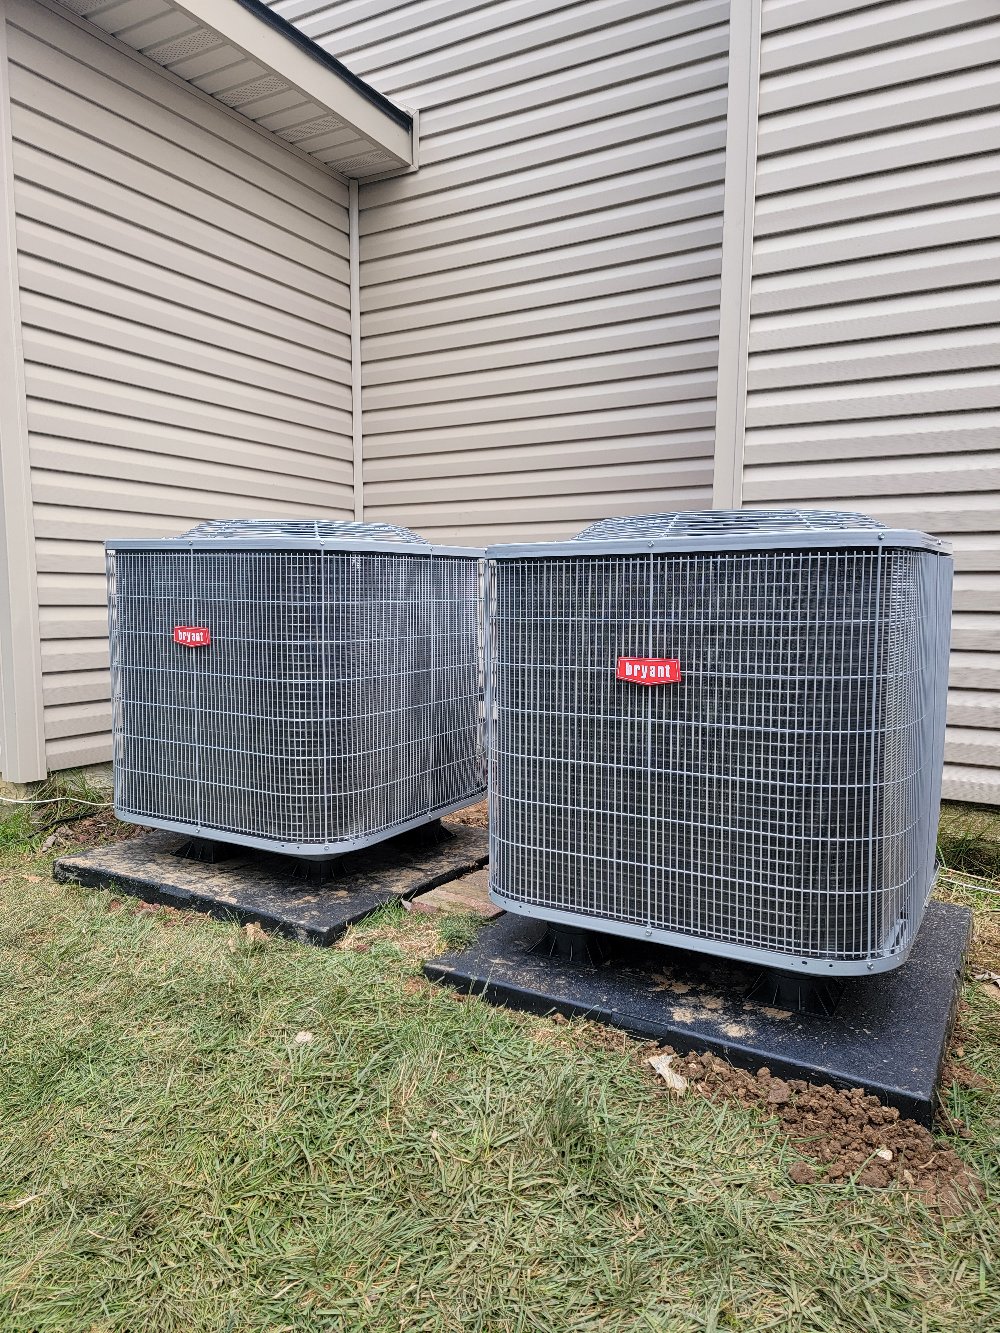 New Heat Pump & New System Installation Completed in Primrose, KY